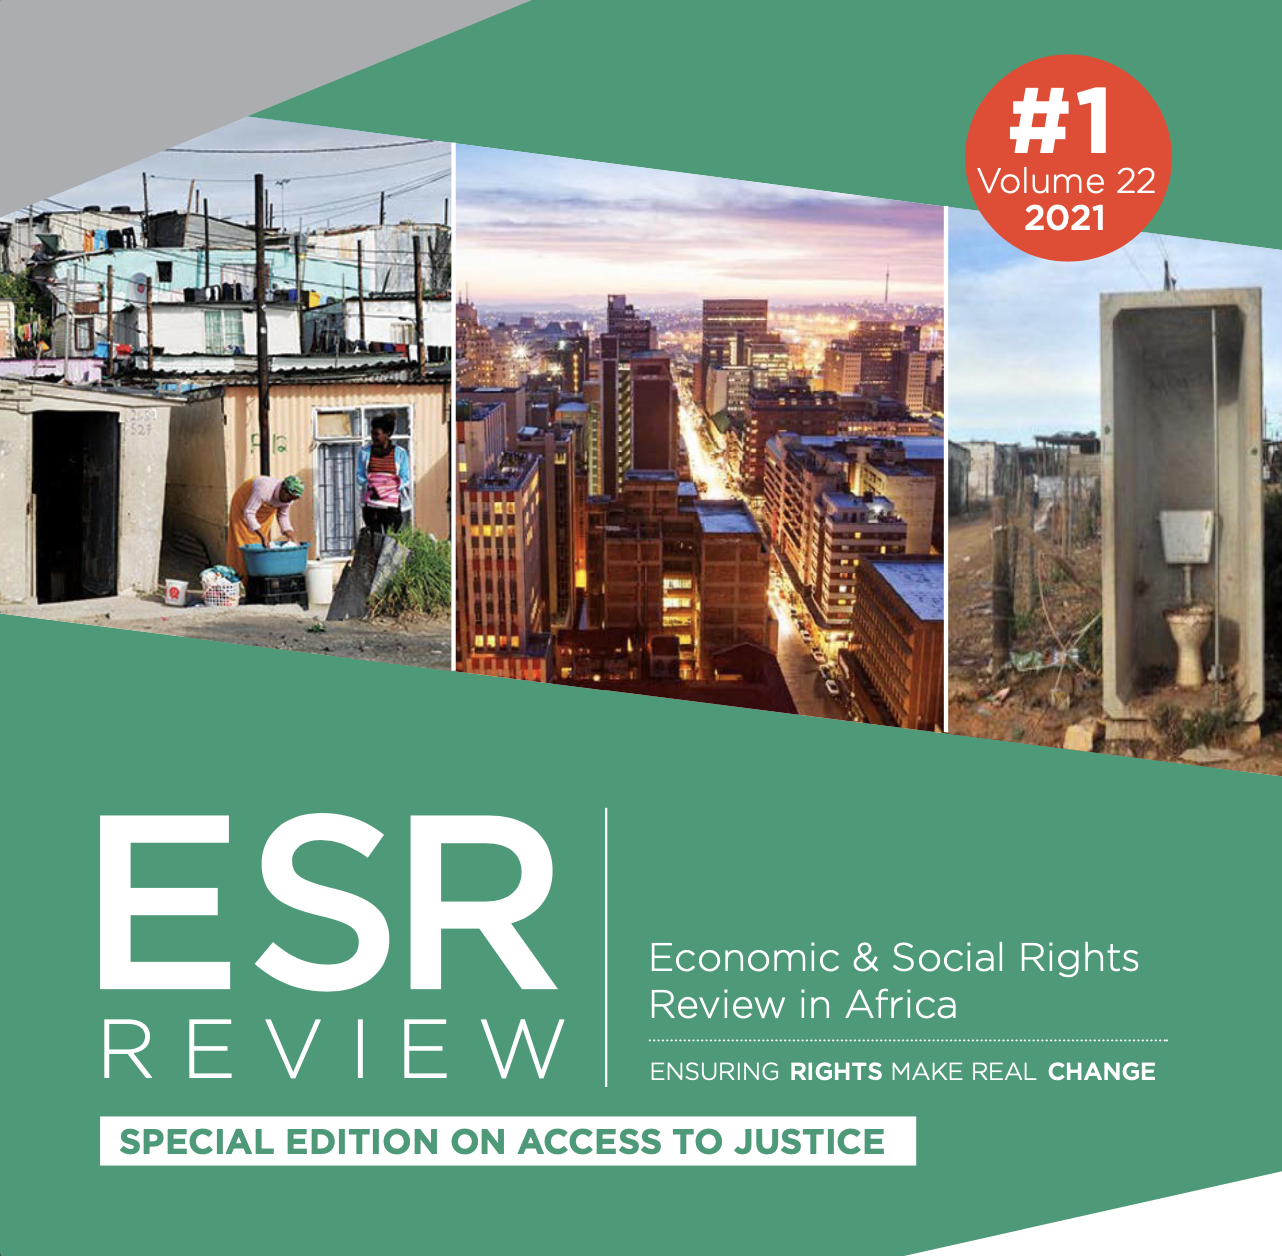 ESR REVIEW: Economic & Social Rights Review in Africa